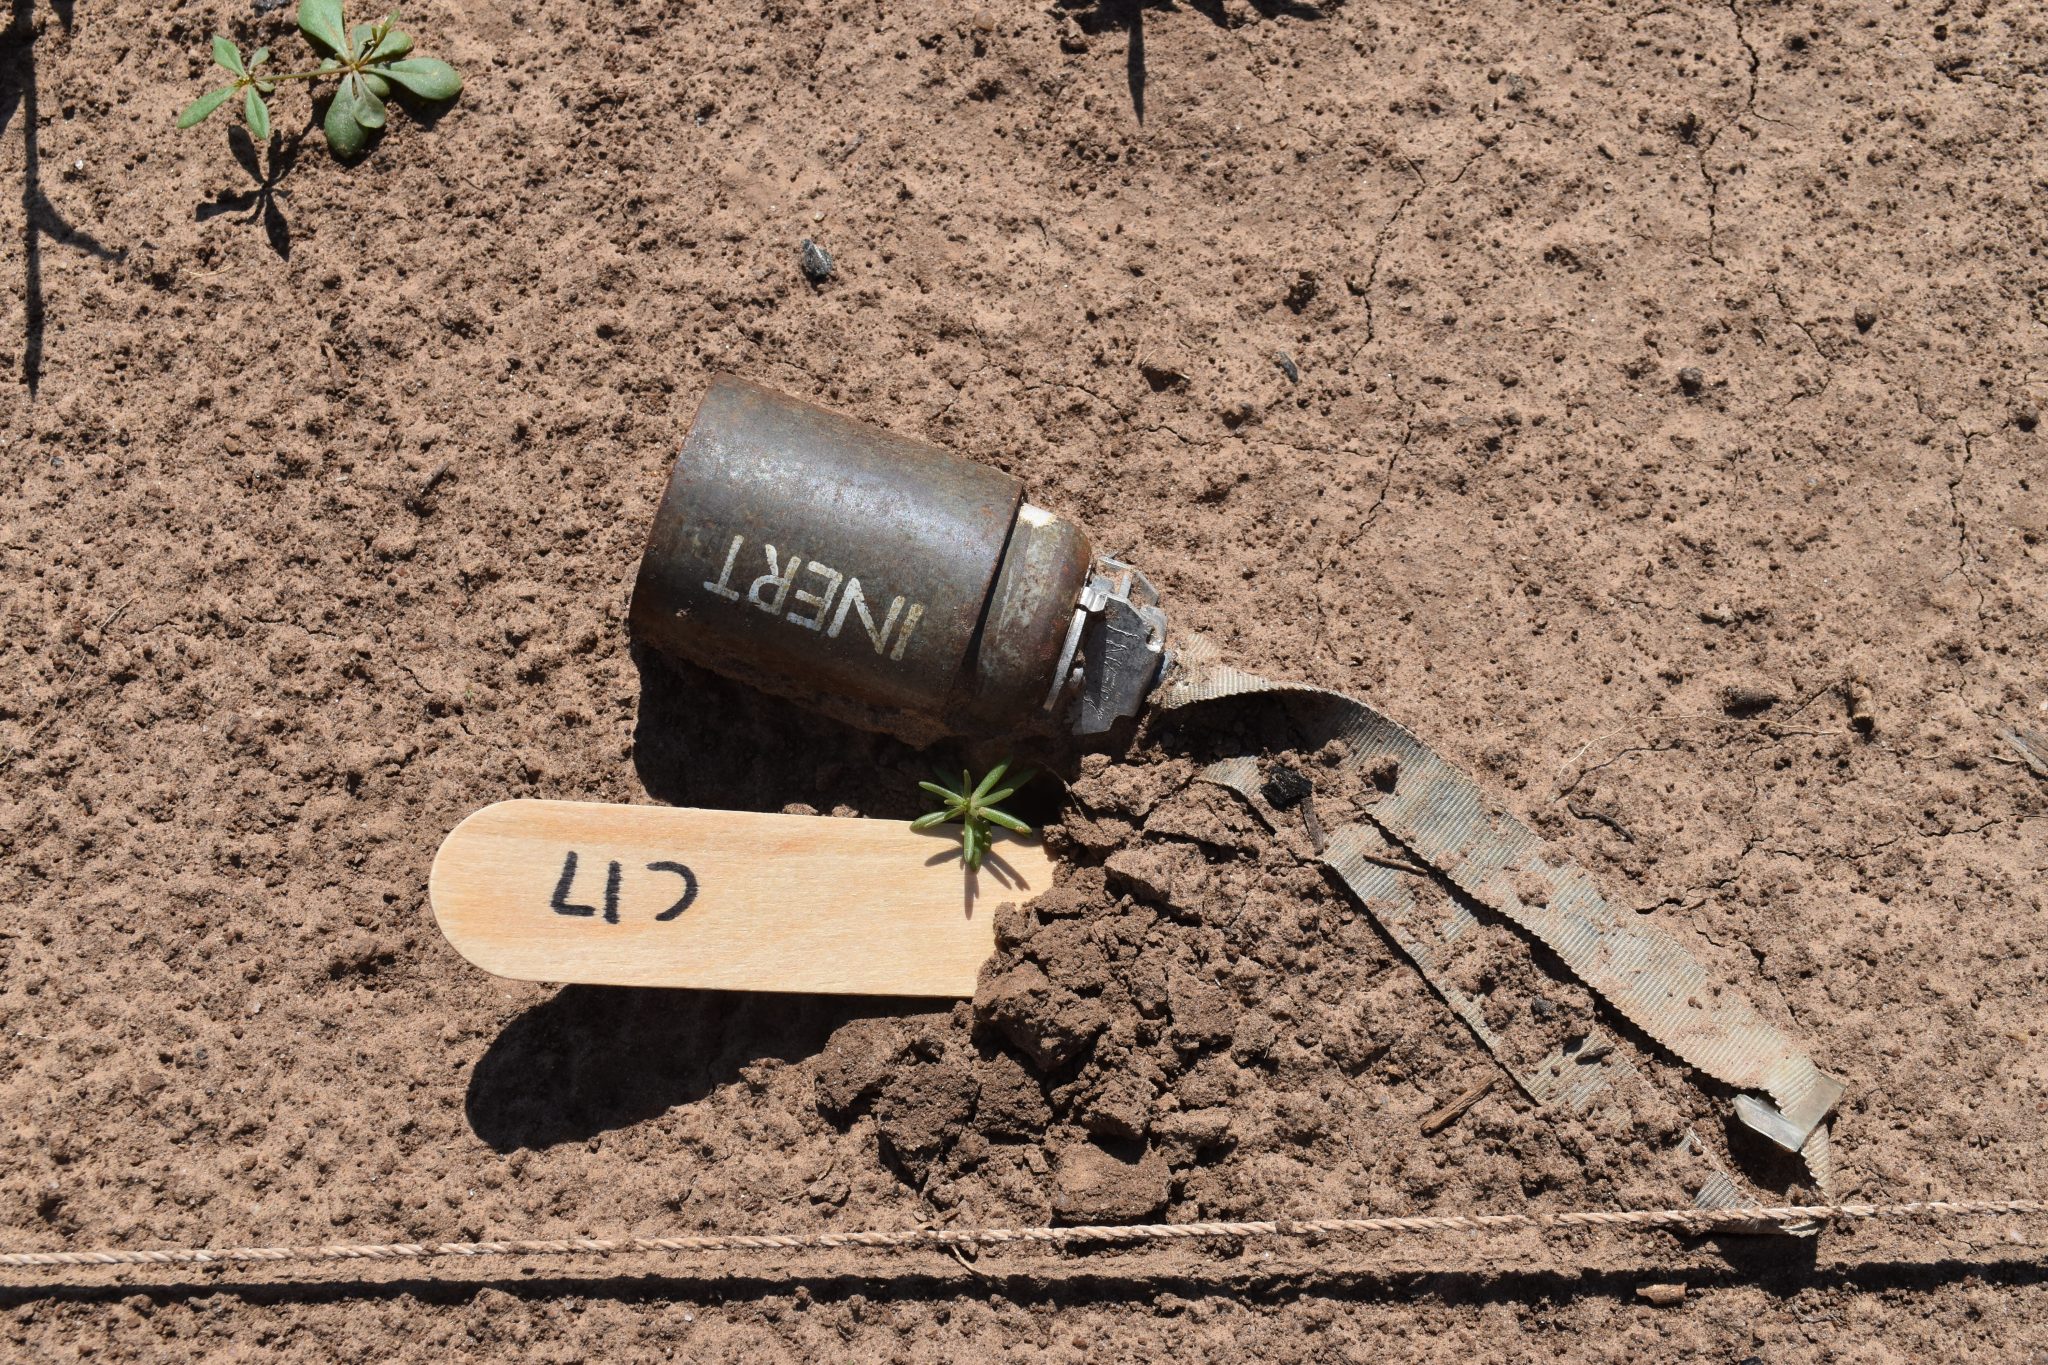 "Intelligence, Researchers Prepare to Do Battle Against Land Mines"